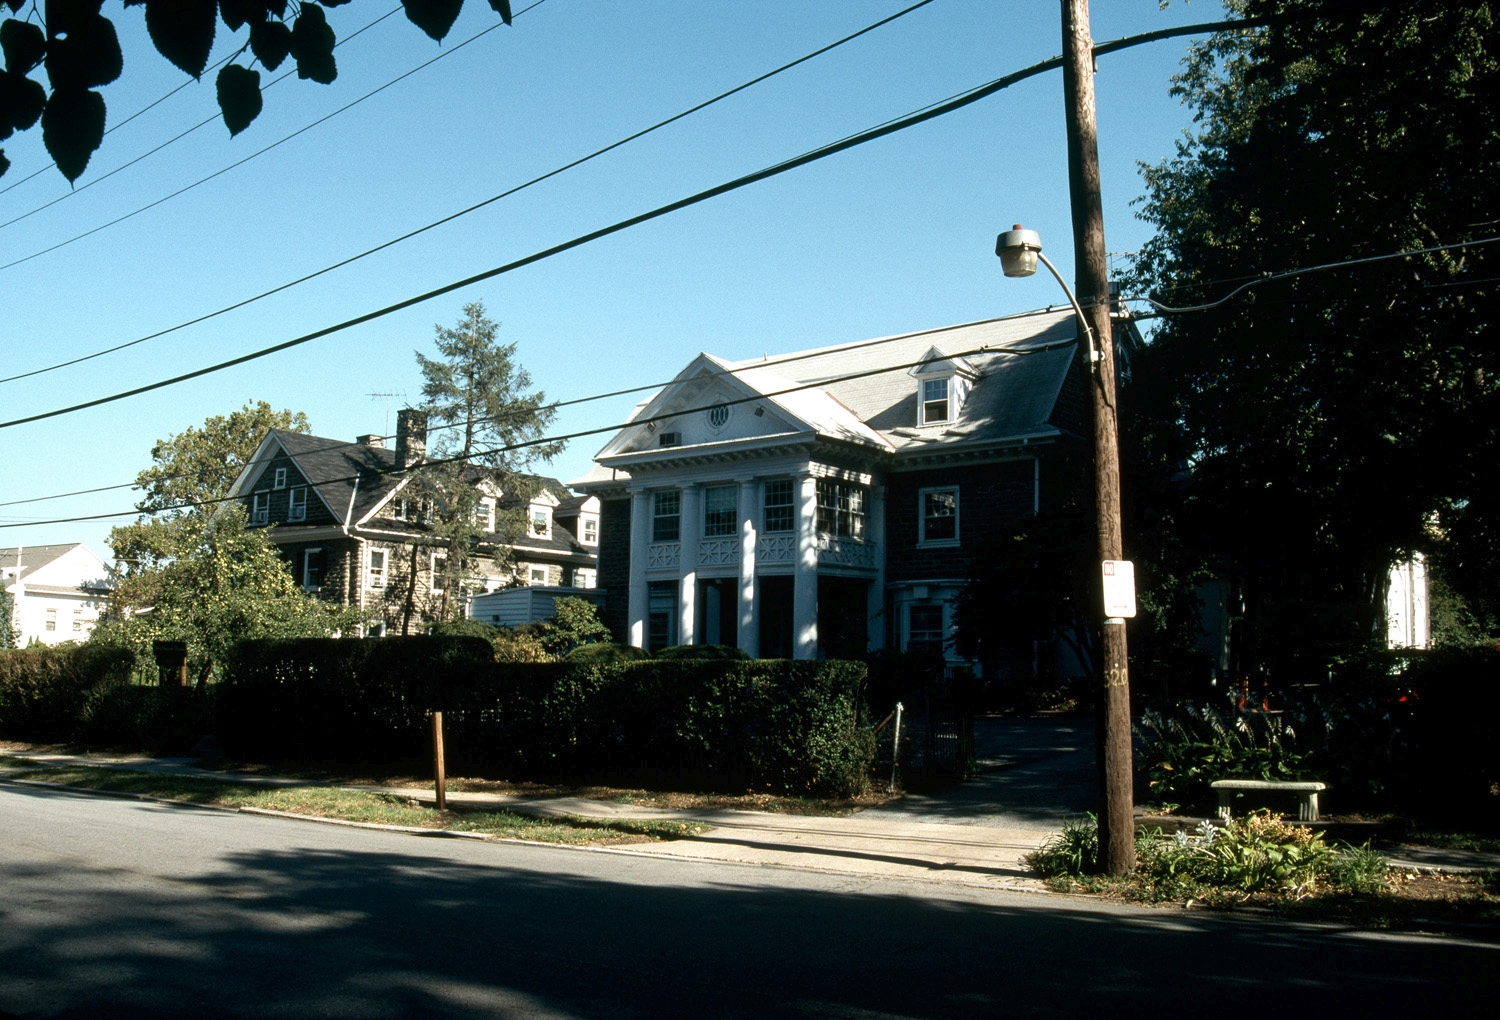 View from street, looking east, showing situation in surrounding residential neighborhood